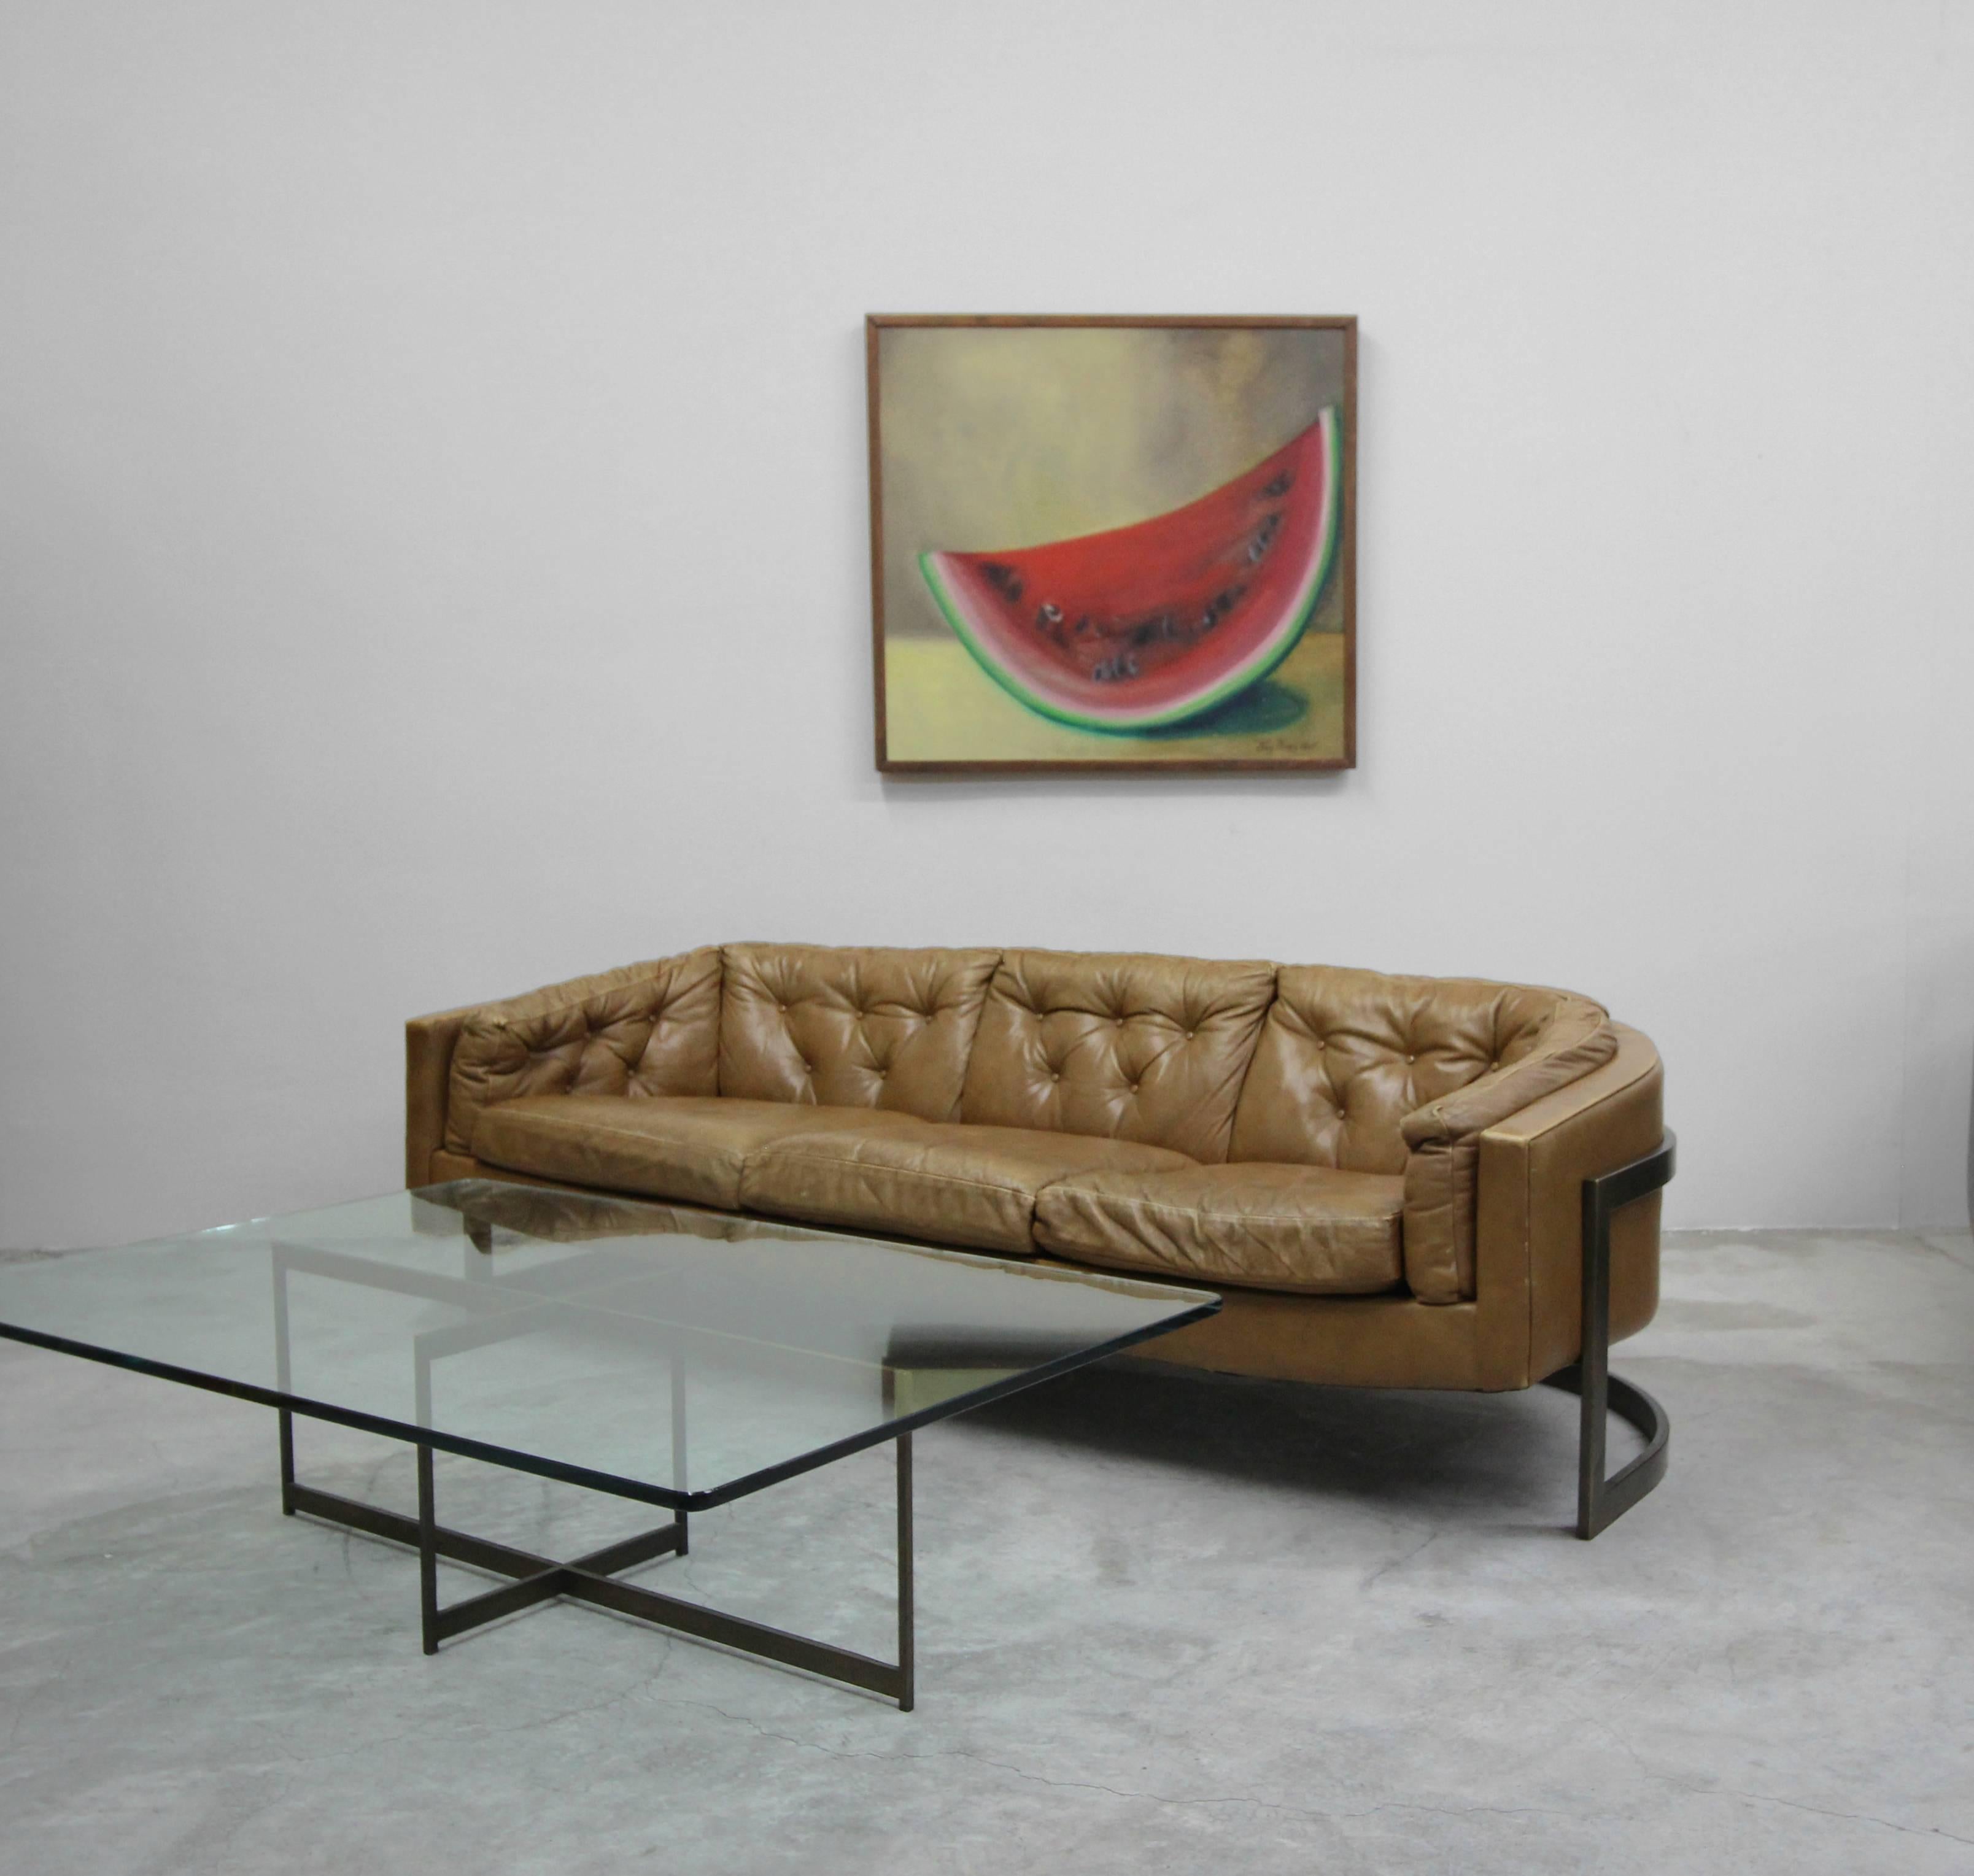 You don't see one of these every day, or ever for the matter. A rare Milo Baughman for Thayer Coggin barrel sofa with the rarest of rare cantilevered bronze frame. As if the bronze frame wasn't enough, it is still handsomely dressed in it's all